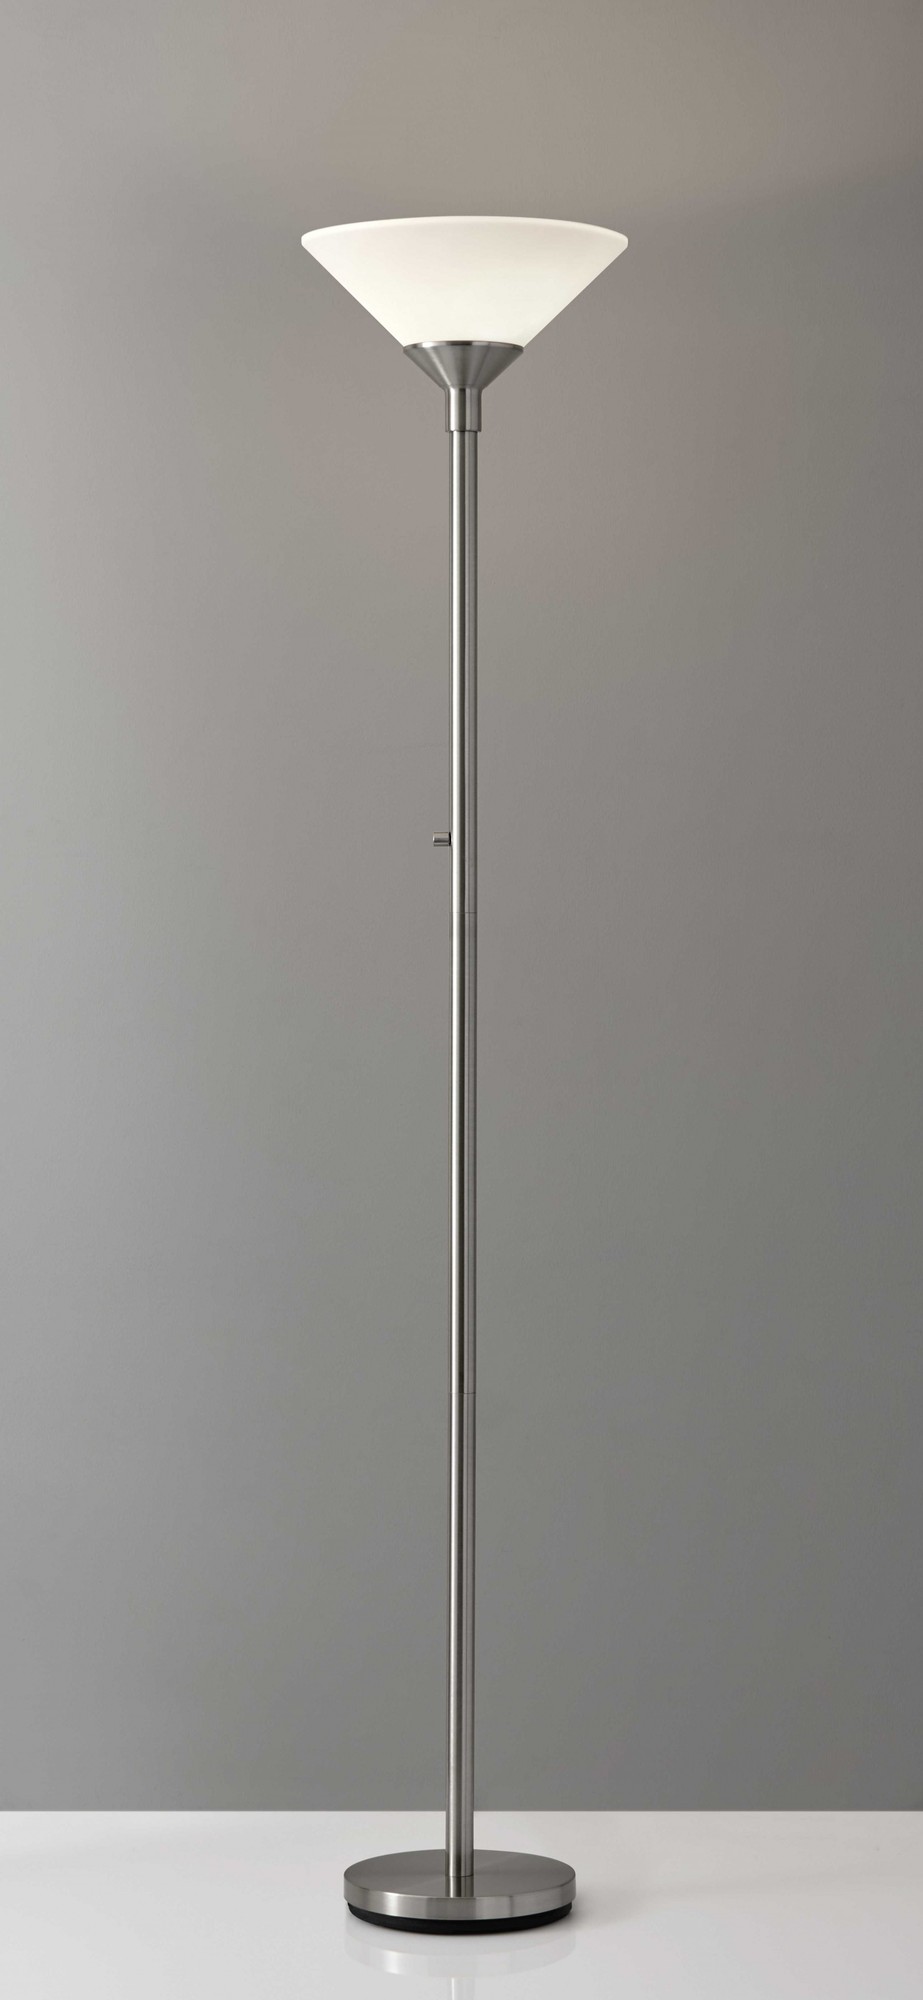 14" X 14" X 73" Brushed steel Metal 300W Torchiere